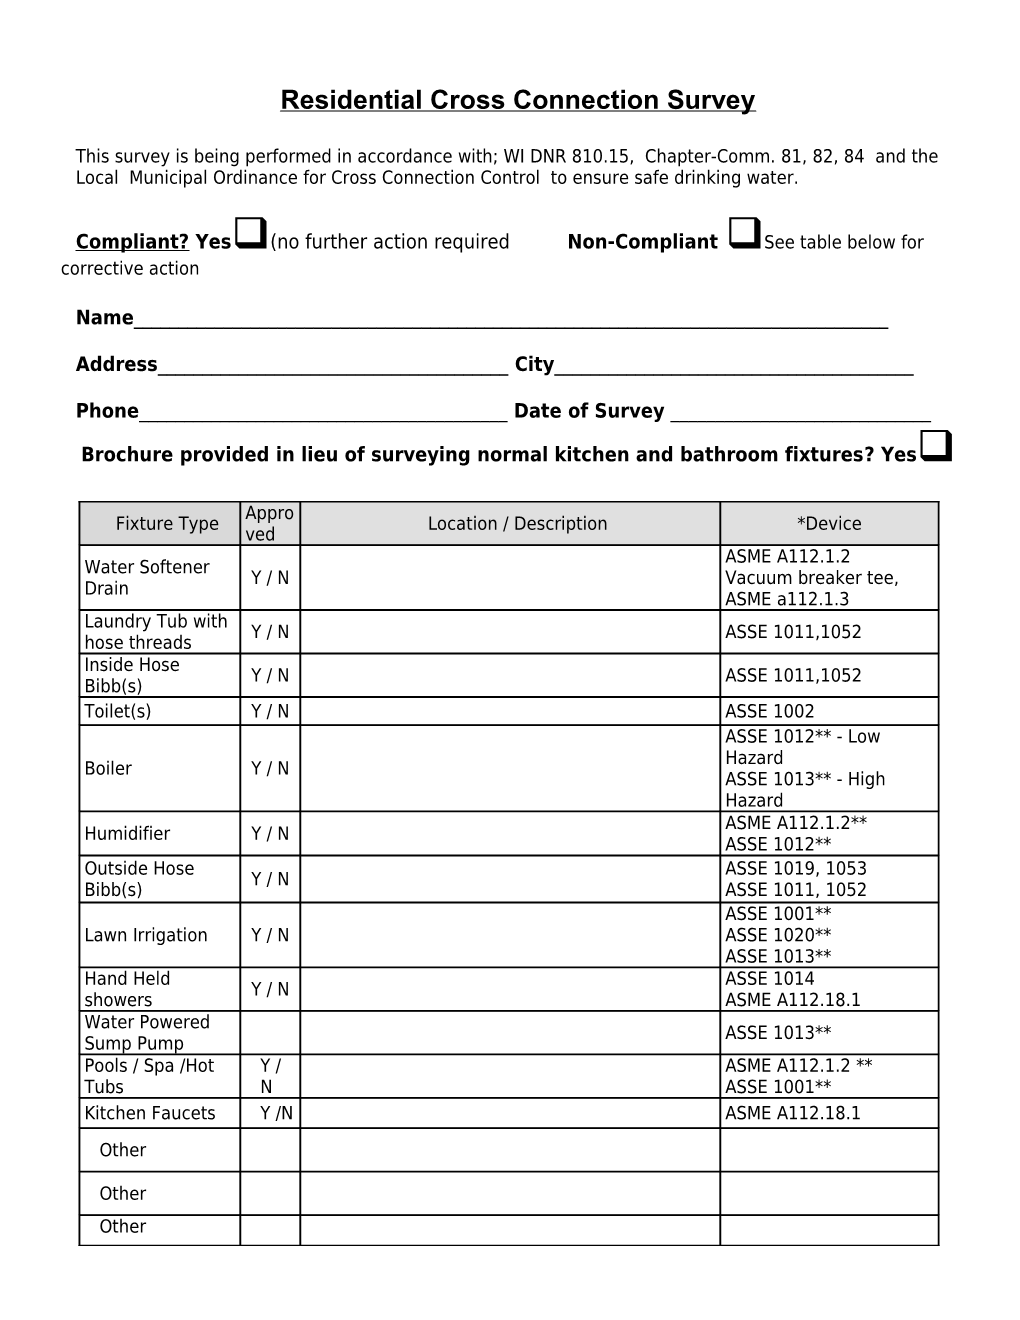 Residential Cross Connection Survey Form (A1256726)